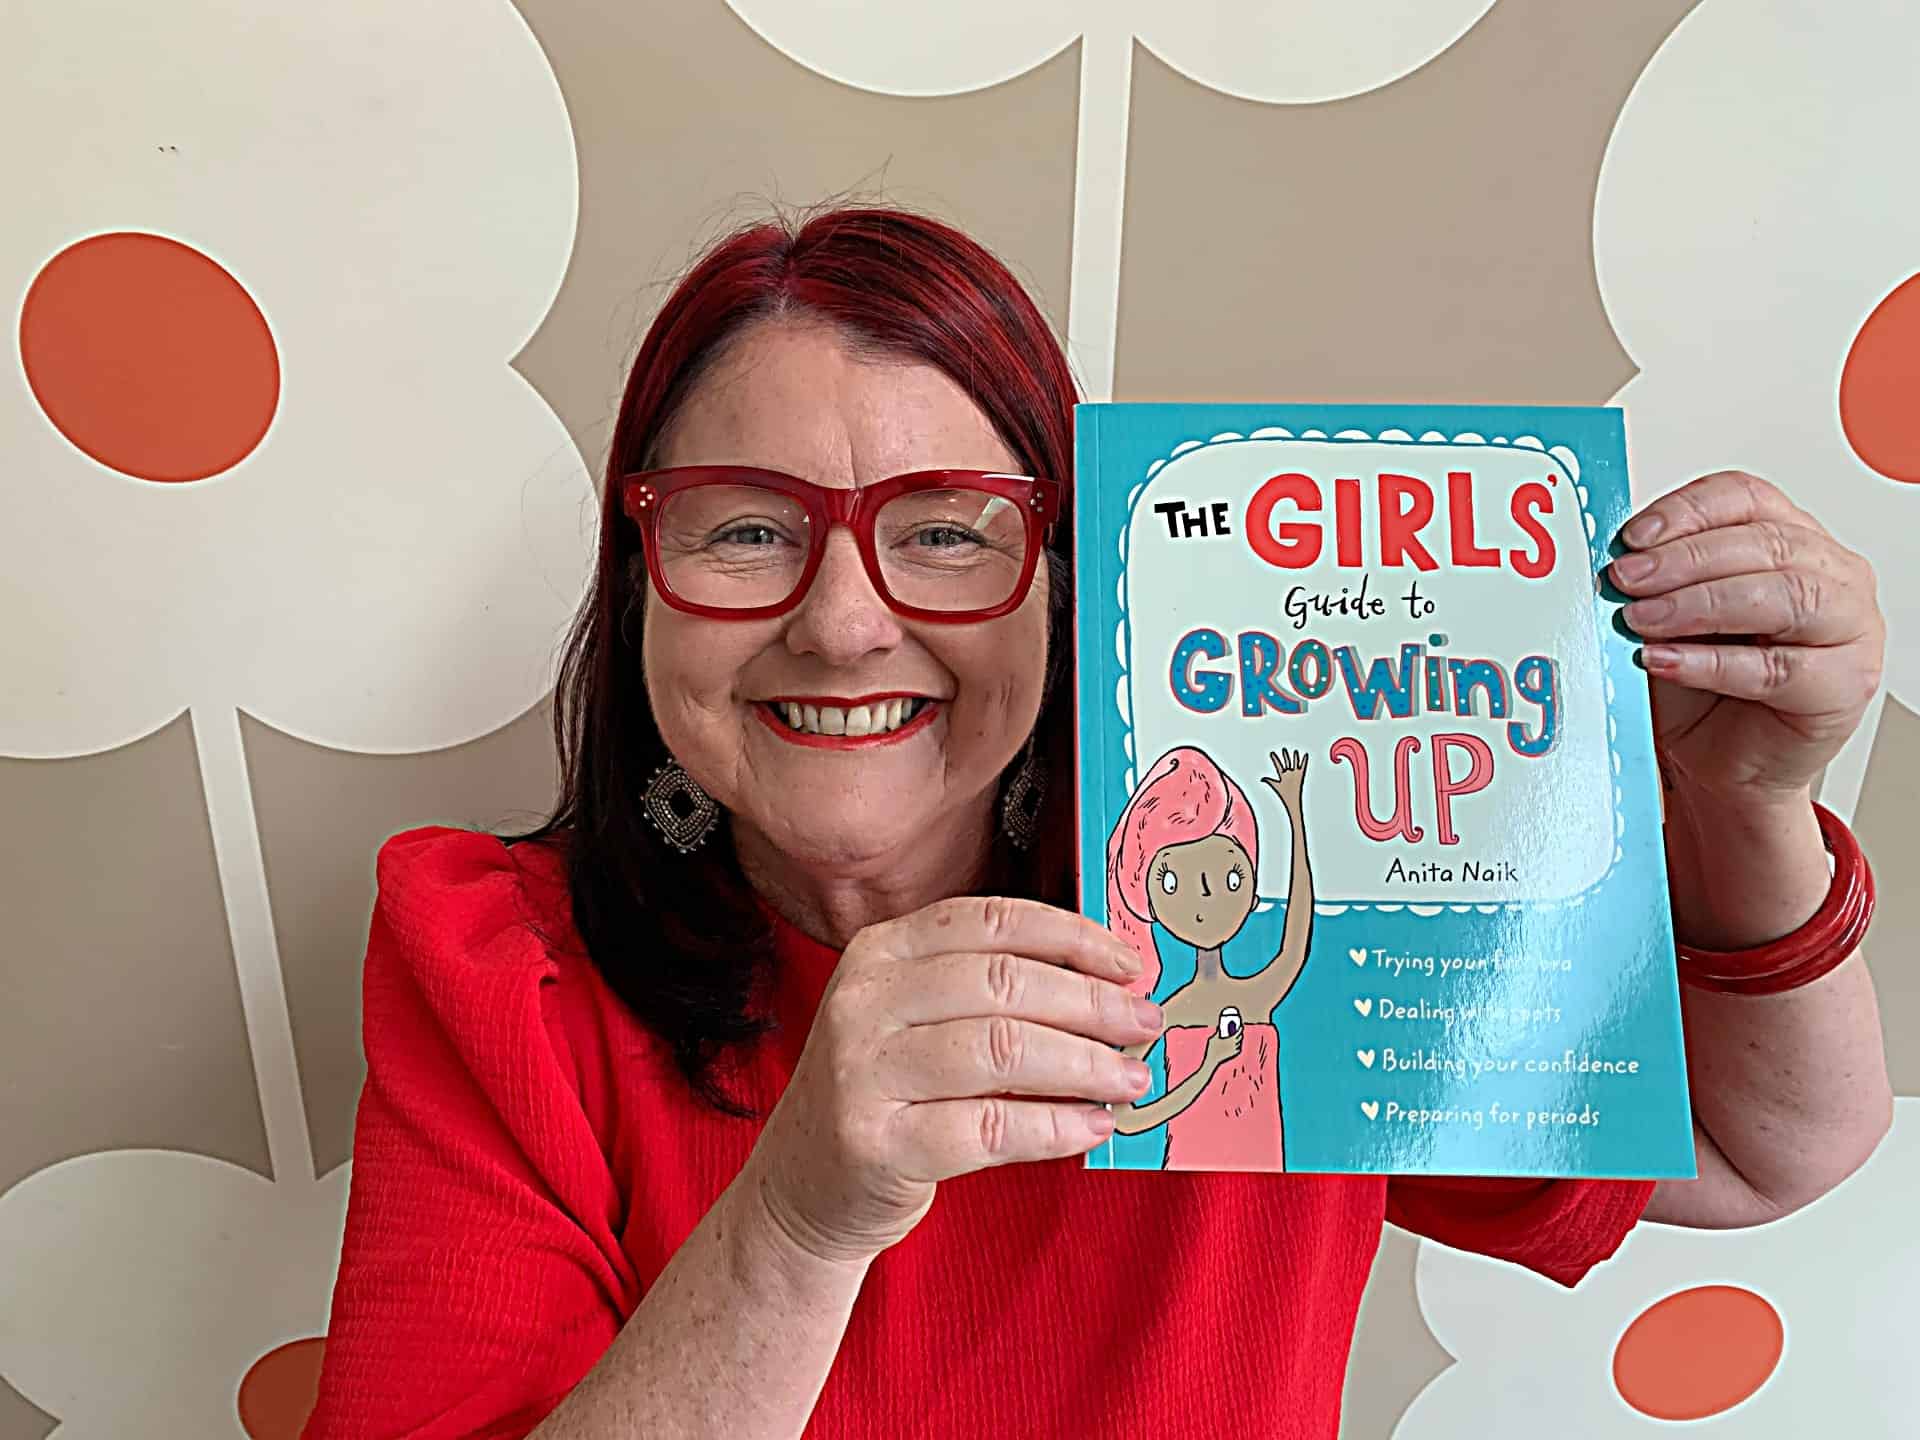 The Girls' Guide to Growing Up Amazing Me